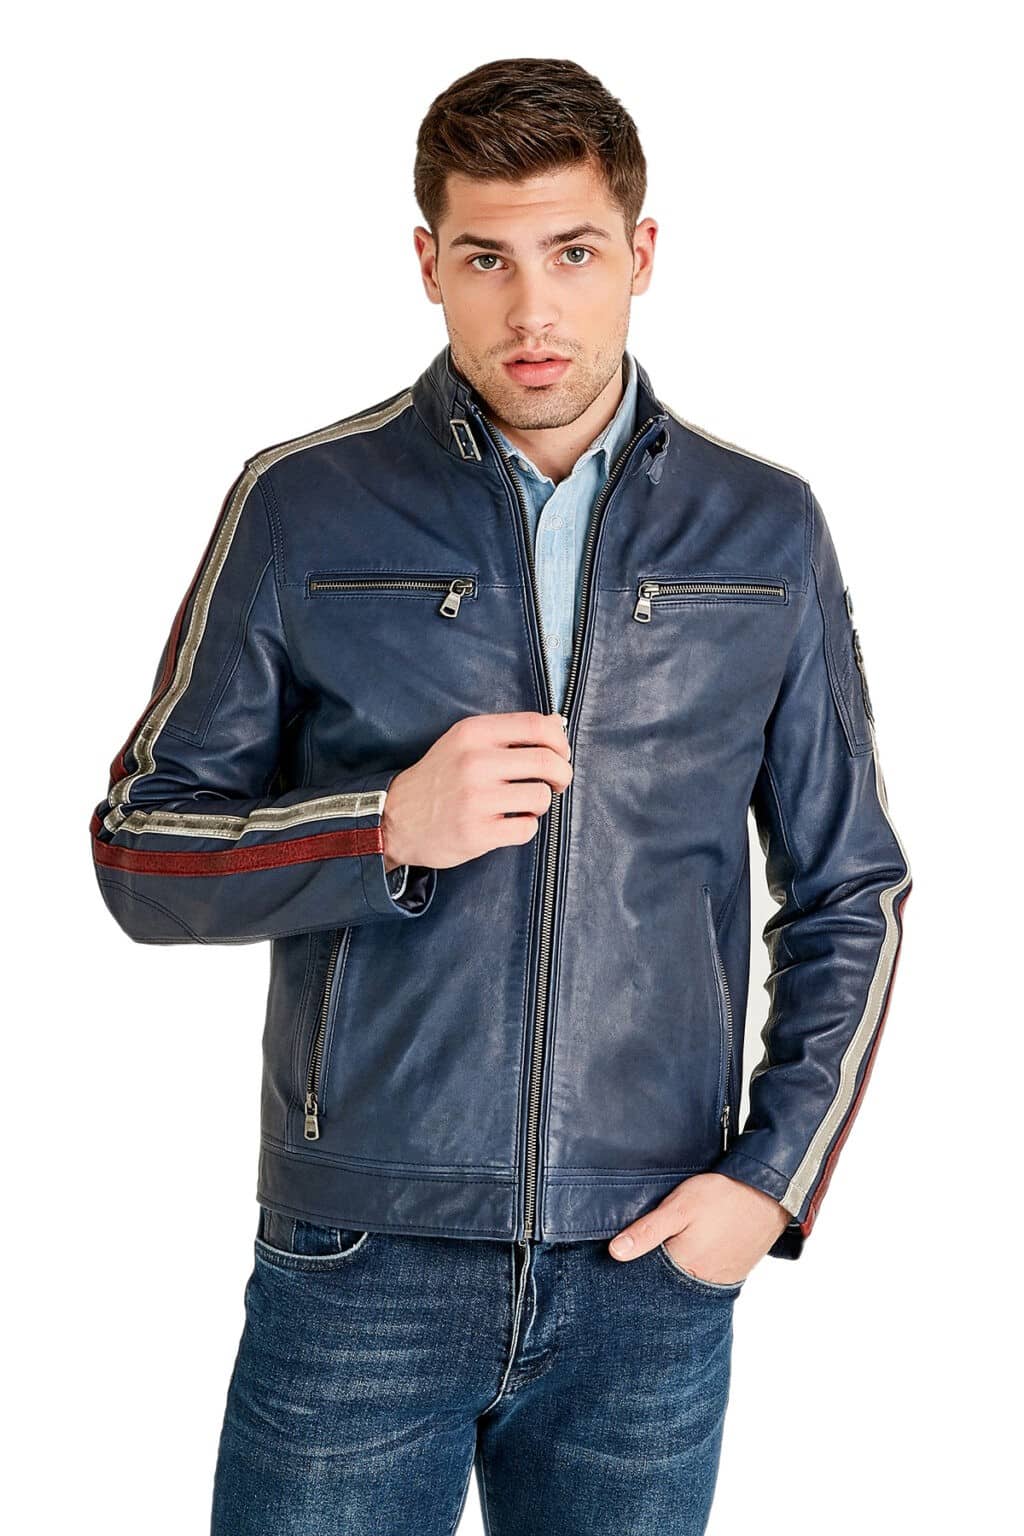 Lifestyle Leather Jackets Store for Men's and Women's | UFS